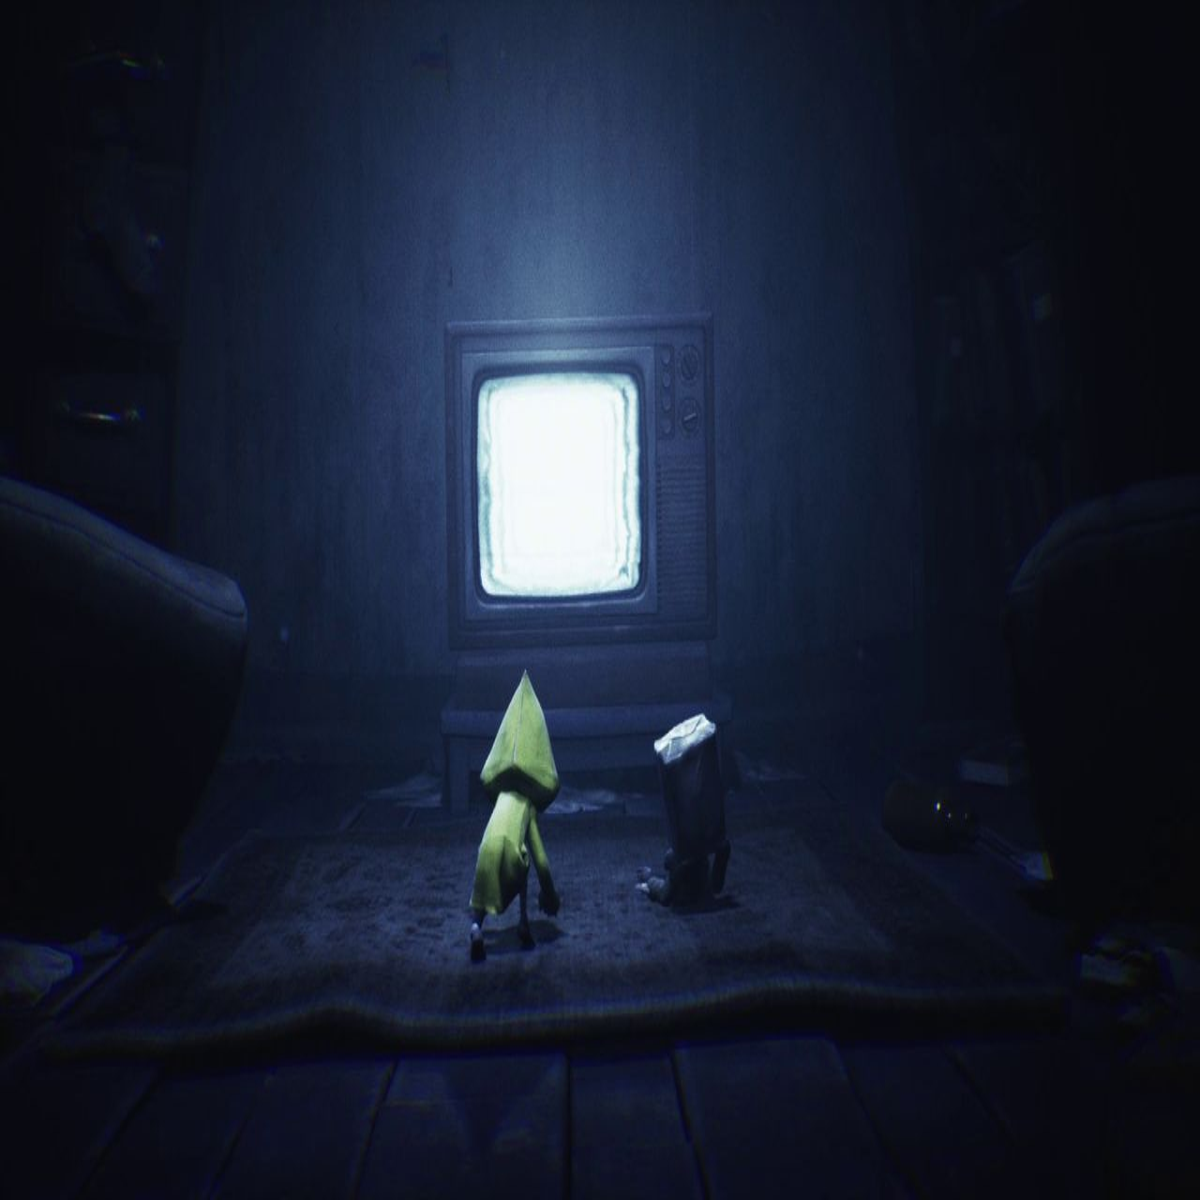 A free Little Nightmares 2 demo is available to download now